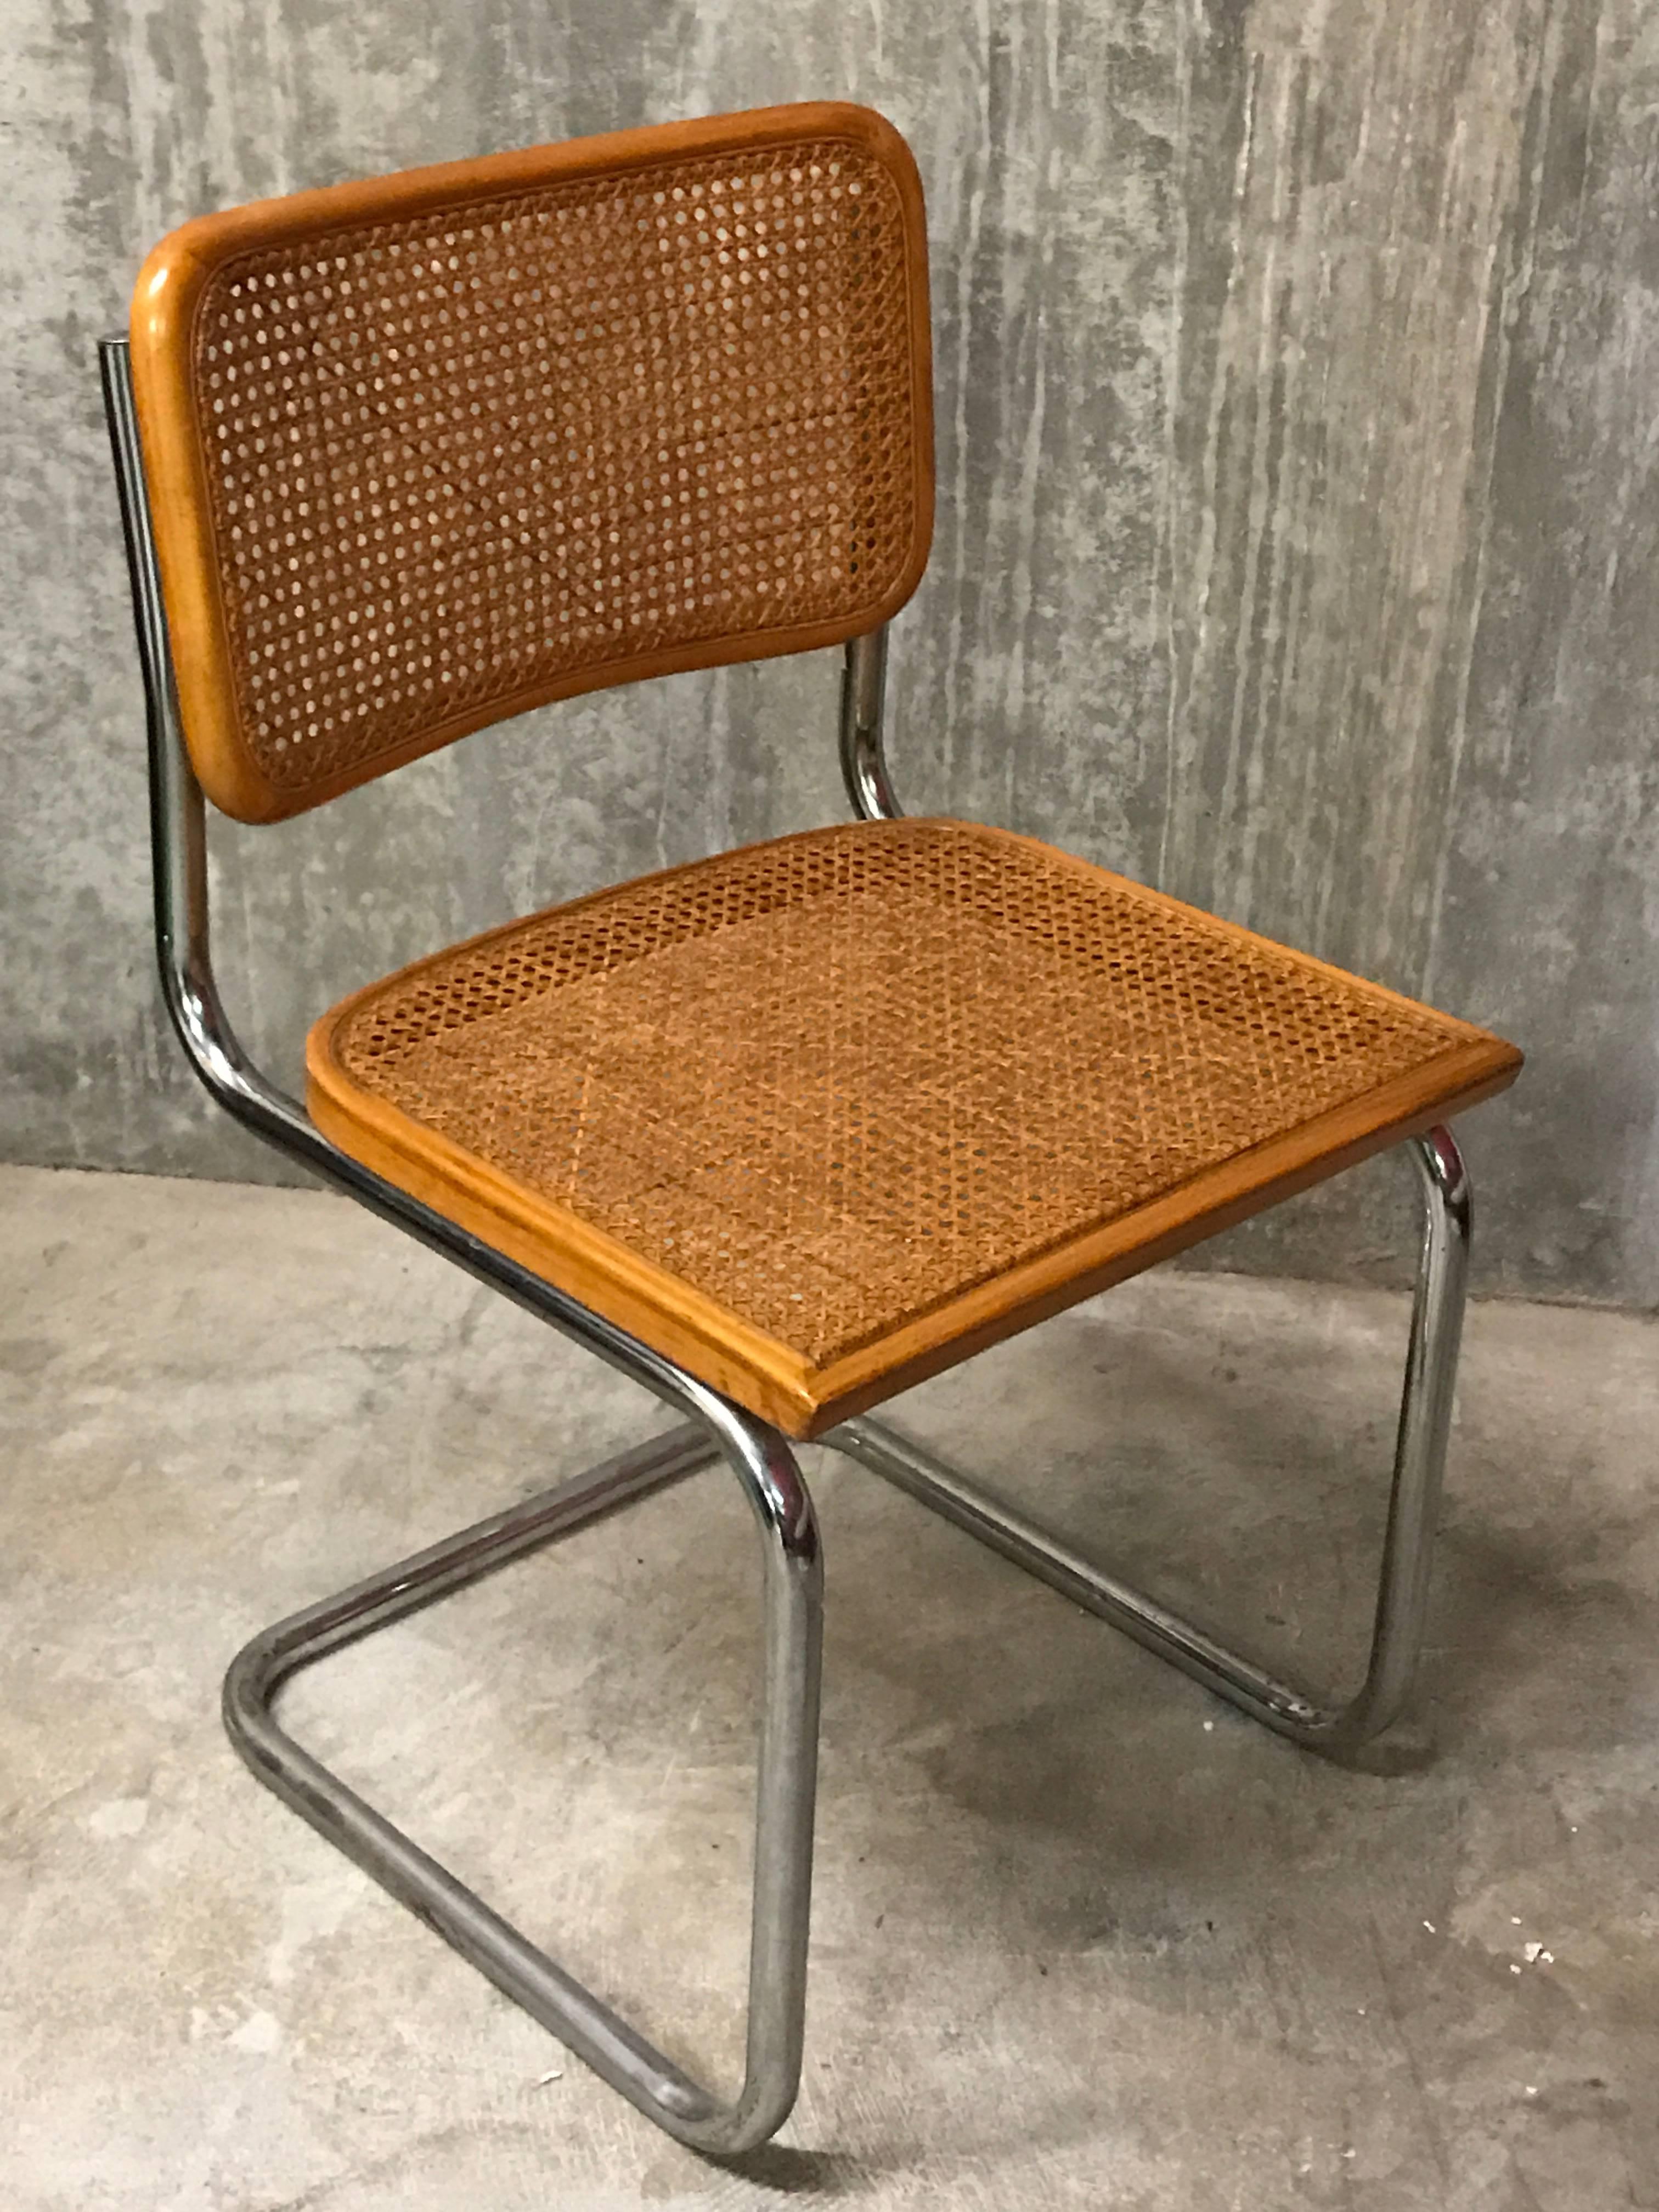 Six vintage Italian Cesca chairs, each one with rich honey yellow frames and firm caning, chrome in good vintage condition, some with made in Italy labels.